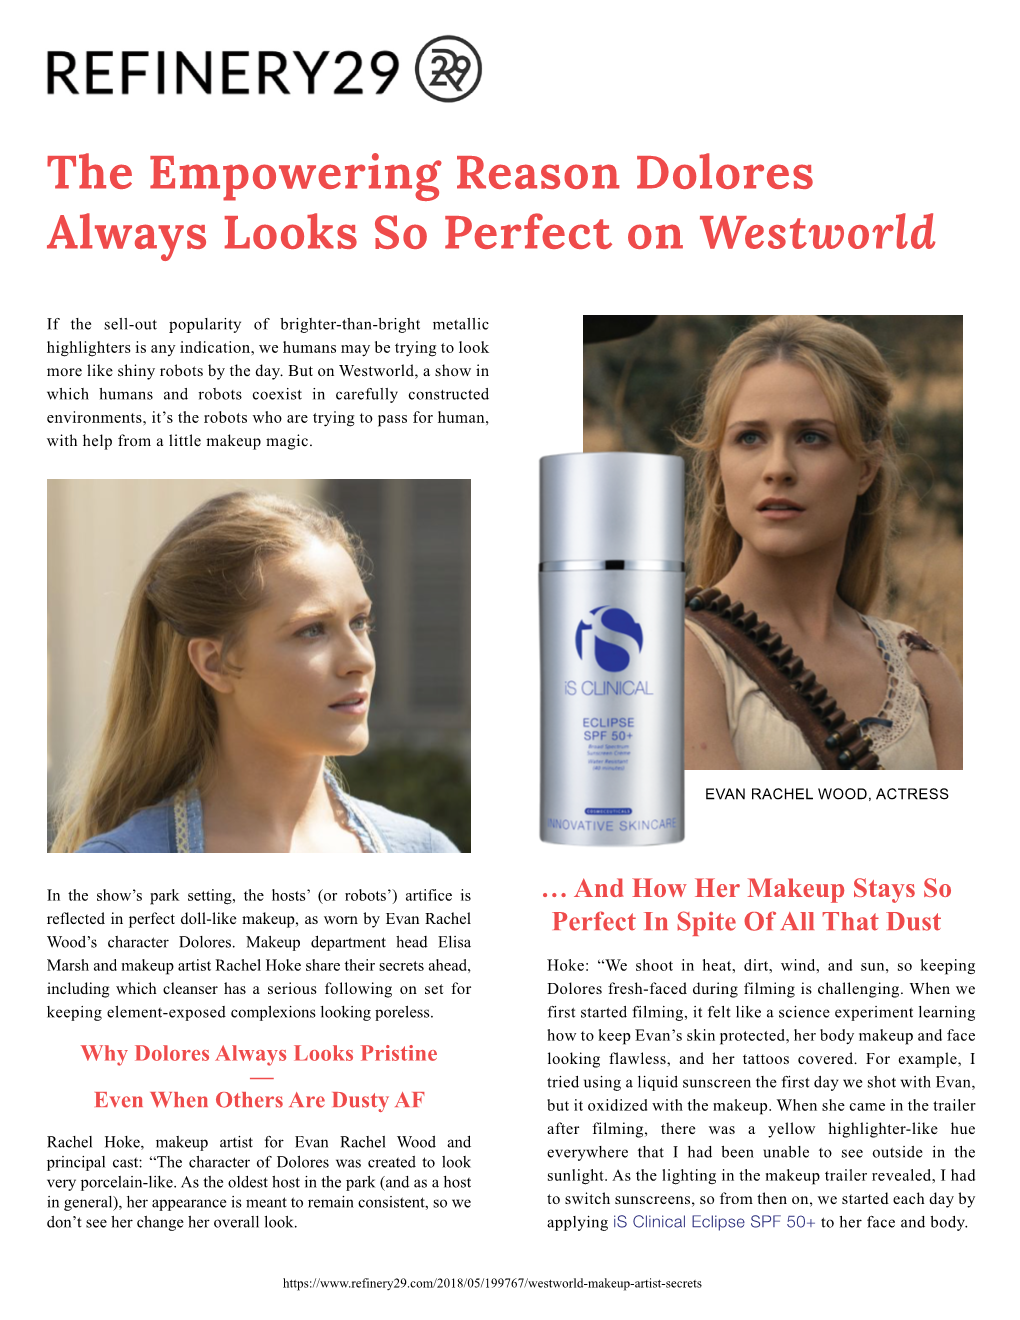 The Empowering Reason Dolores Always Looks So Perfect on Westworld